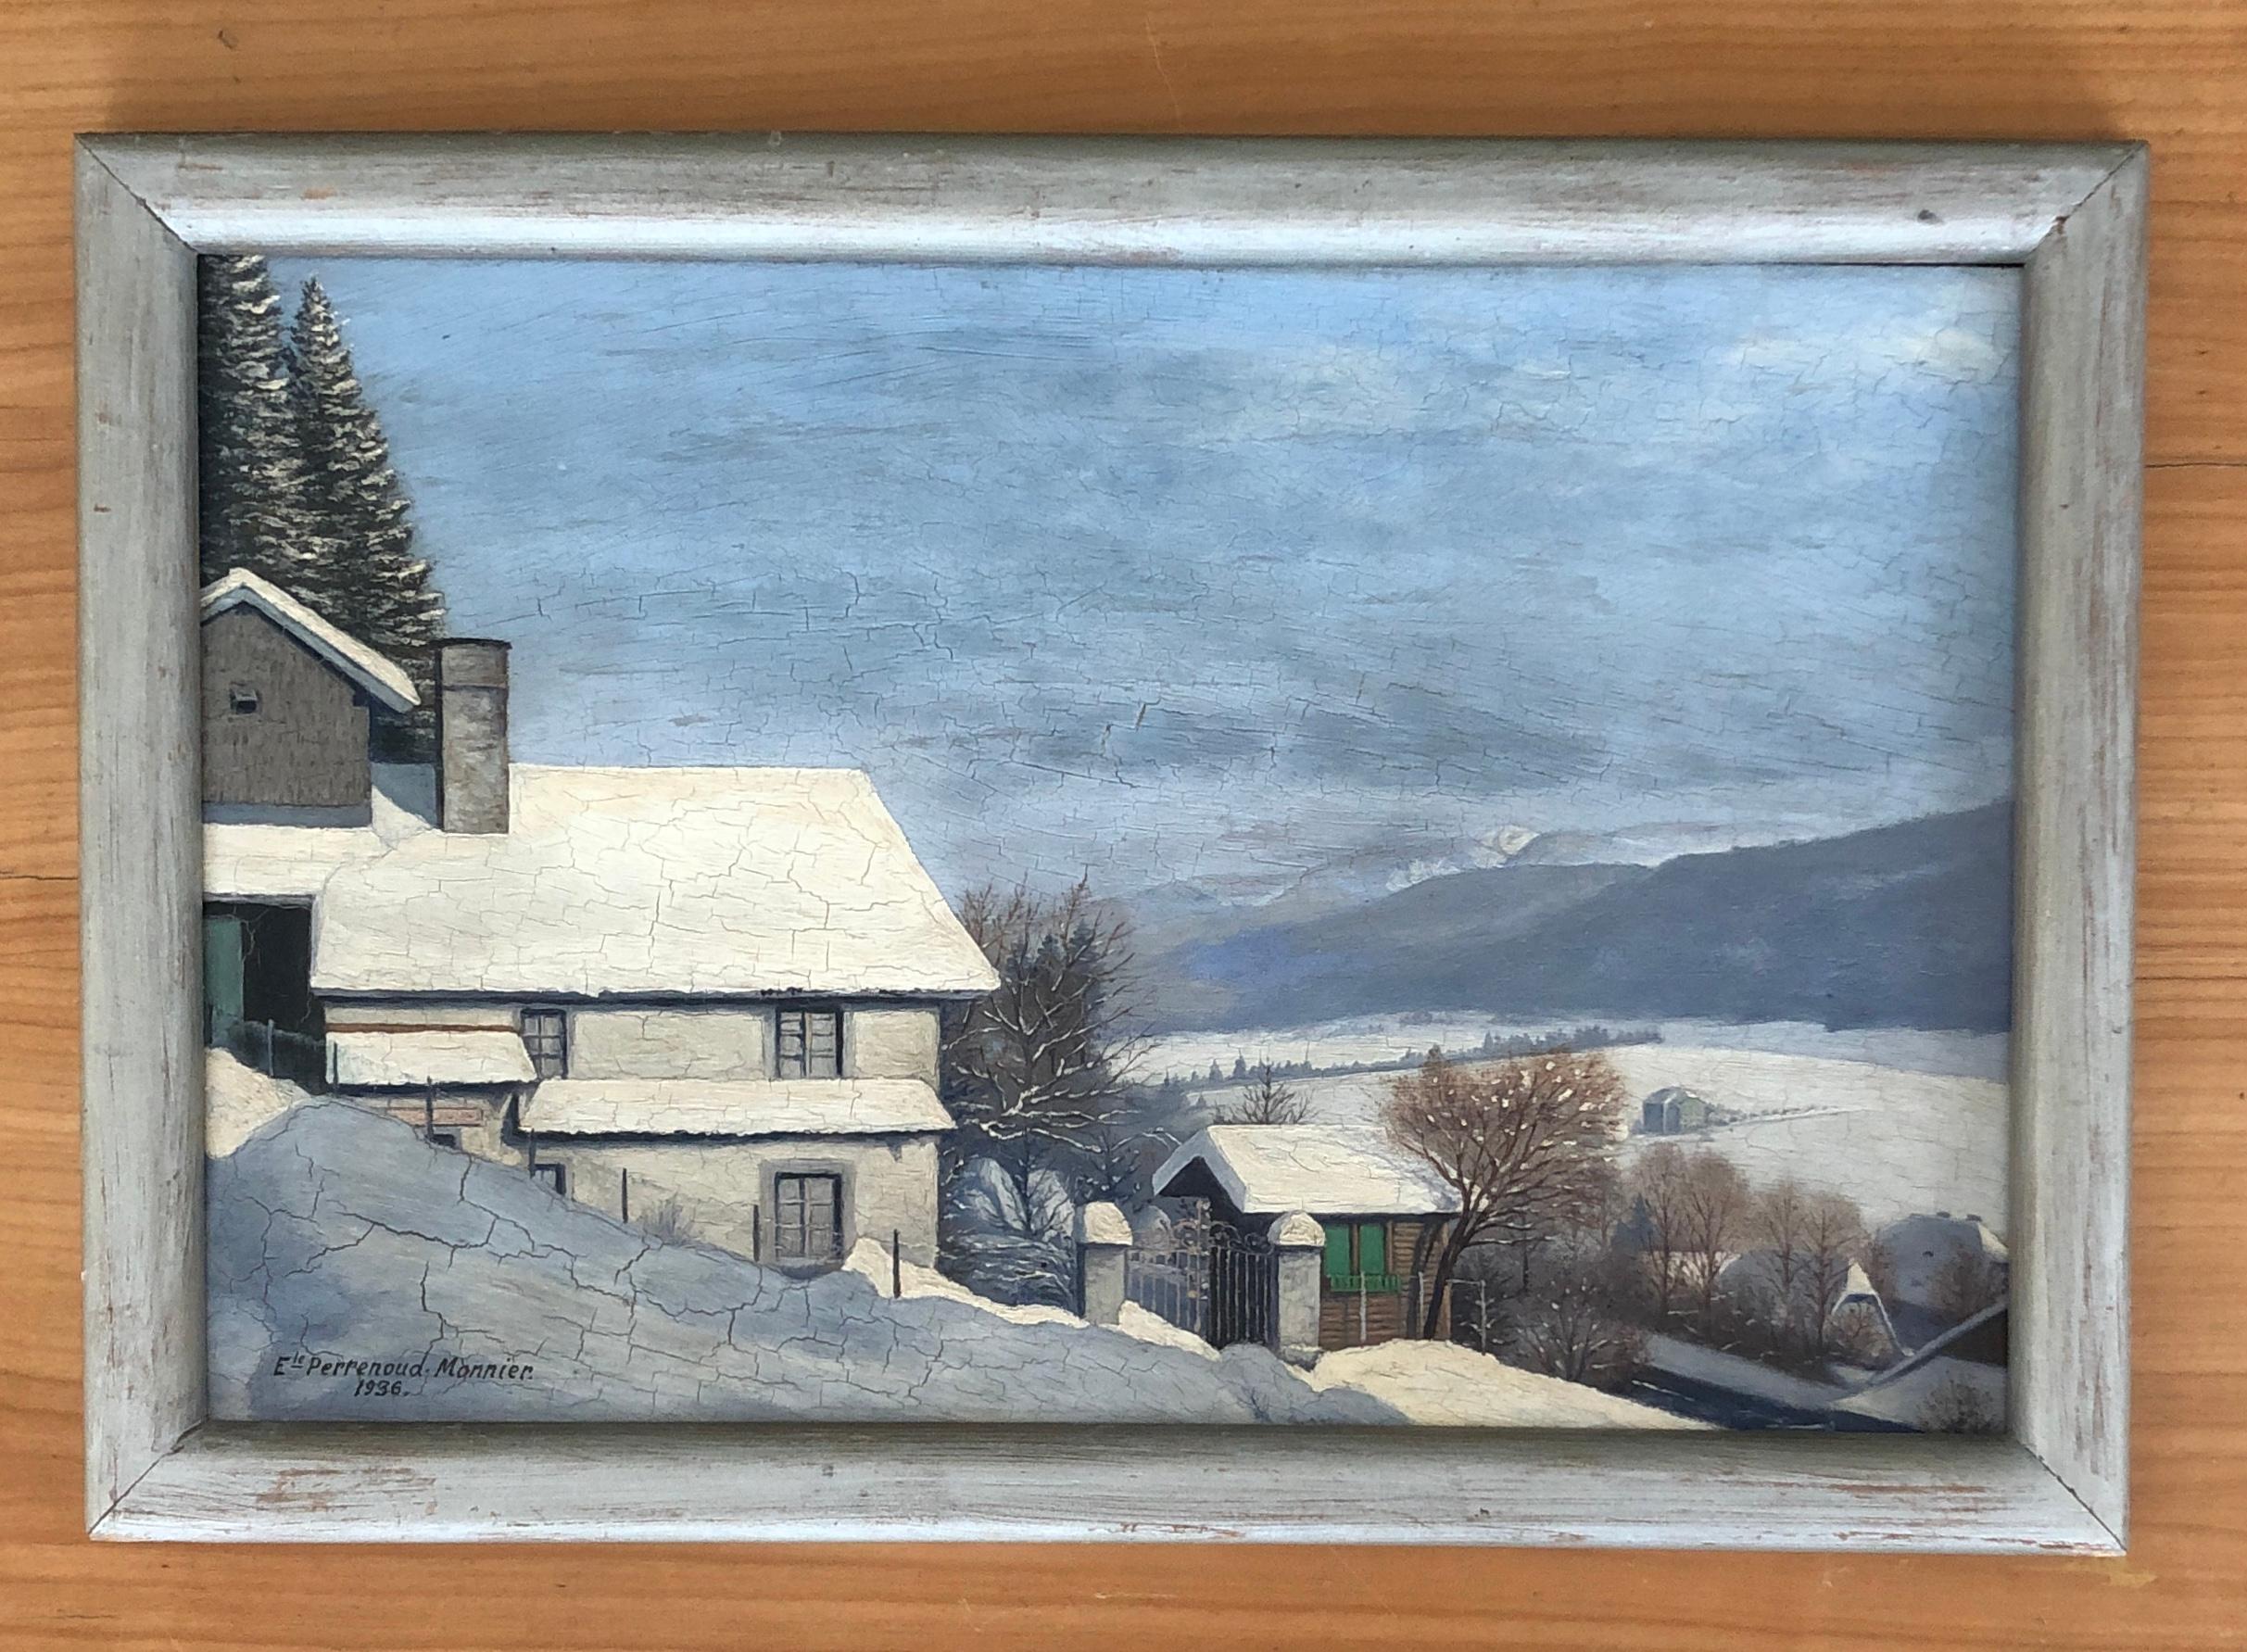 Town in winter - Painting by E. Perrenoud -Monnier